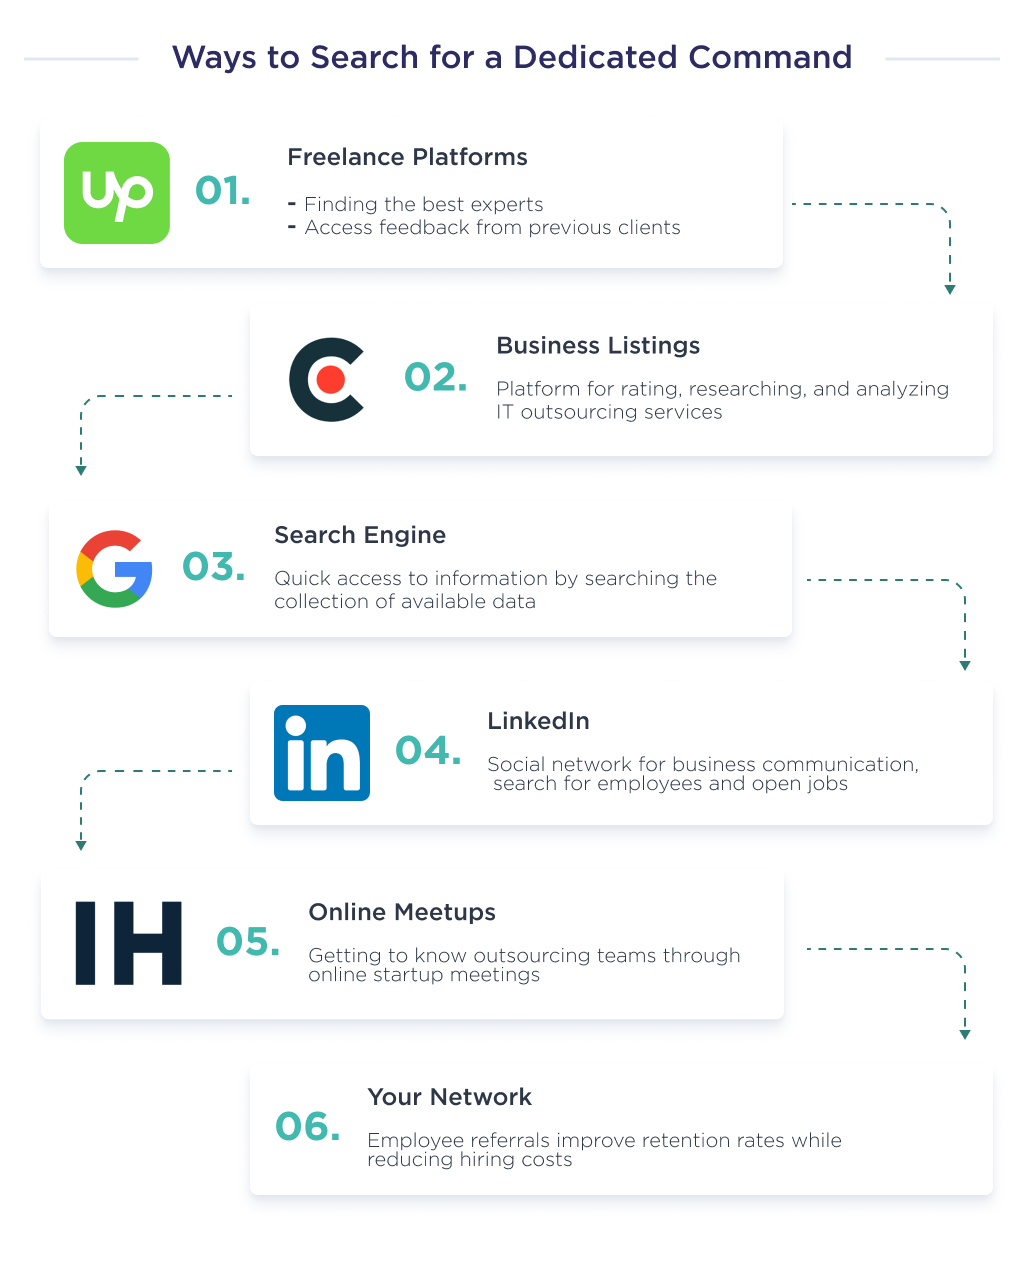 Illustration shows online platforms through which you can find and hire dedicated teams